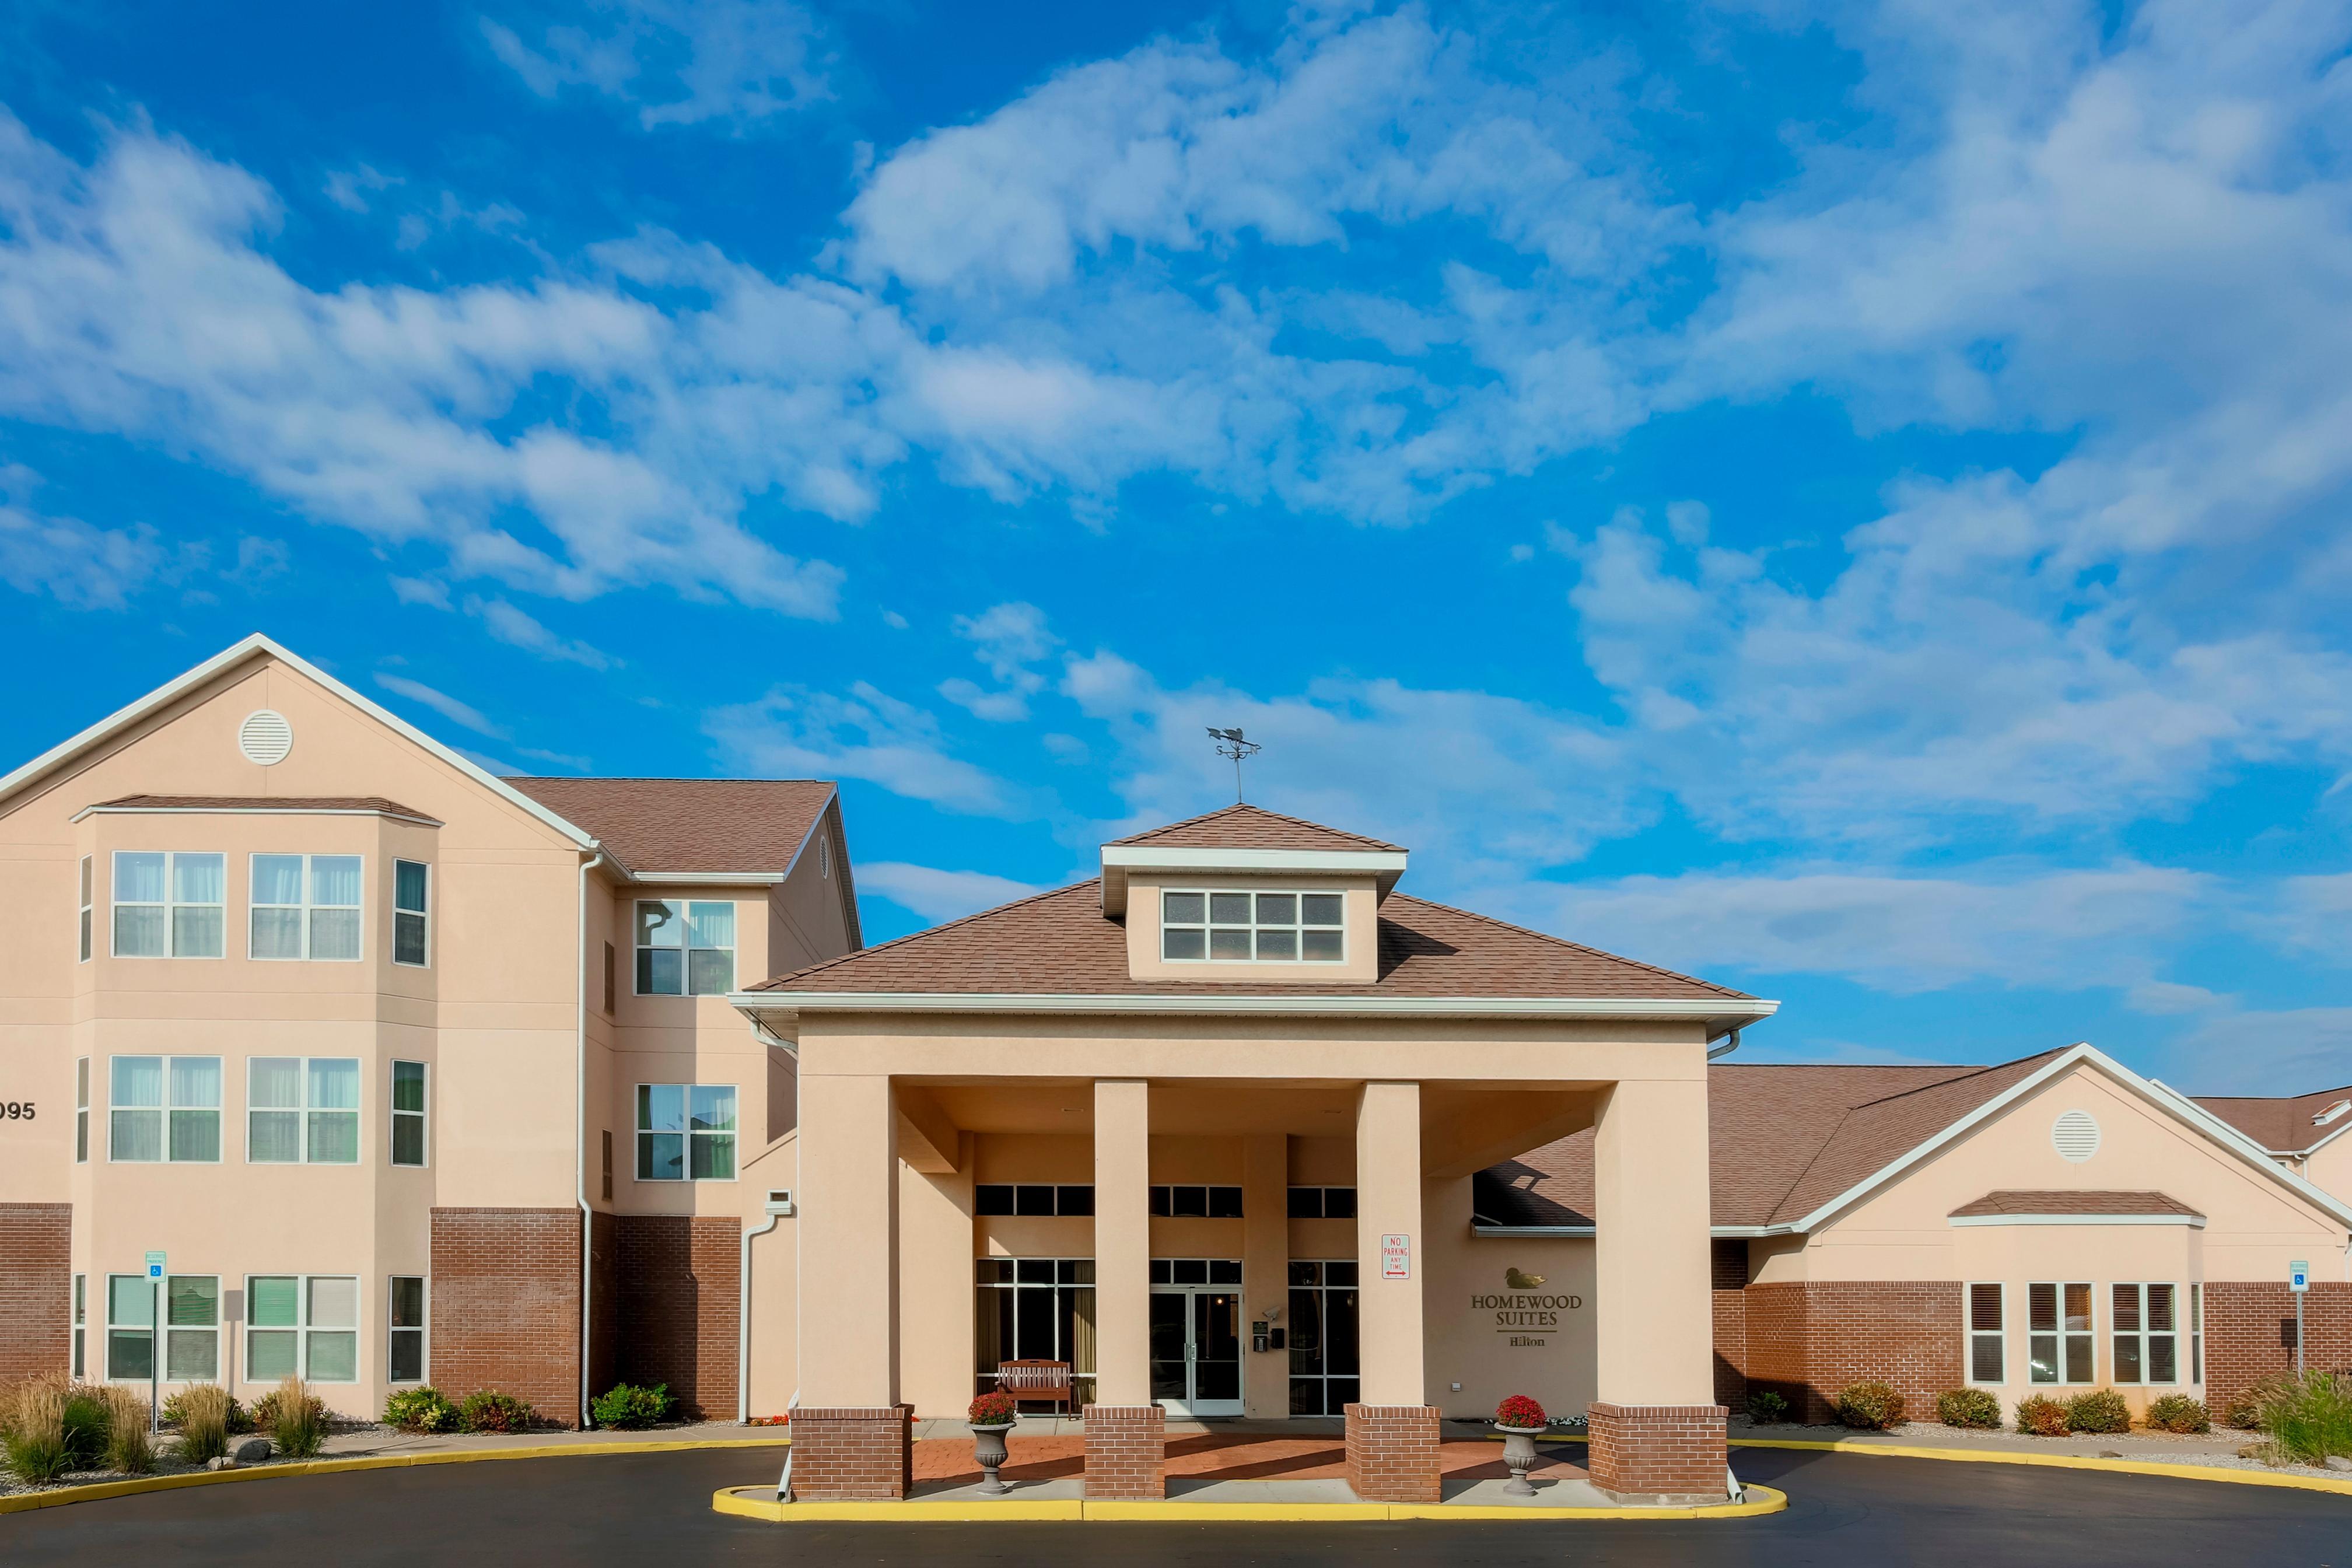 Photo of Homewood Suites Rochester/Henrietta, Rochester, NY